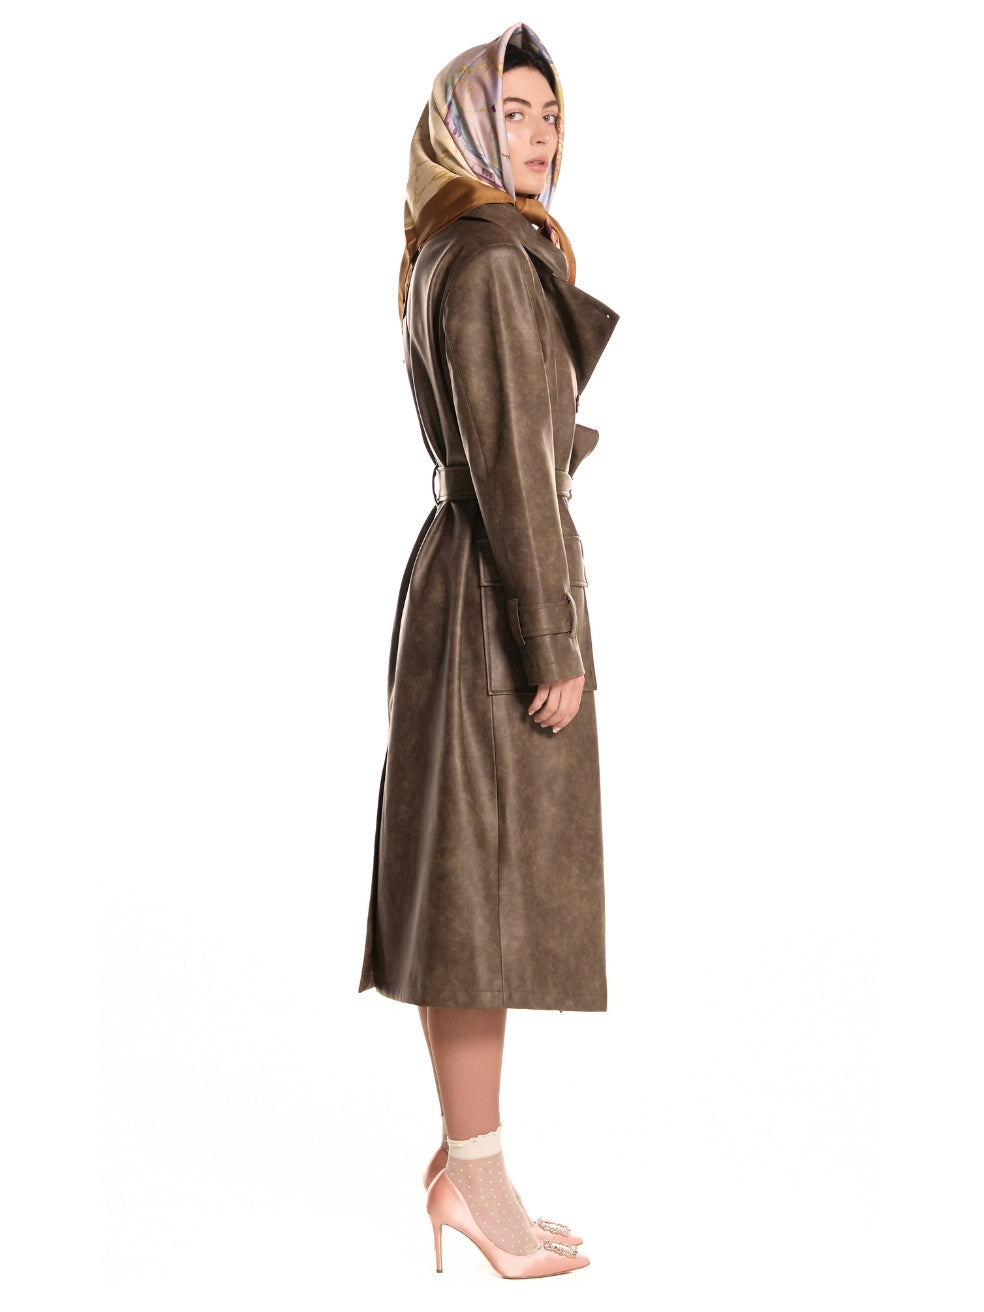 Gina trench coat canadian made ethical outerwear vintage brown gina